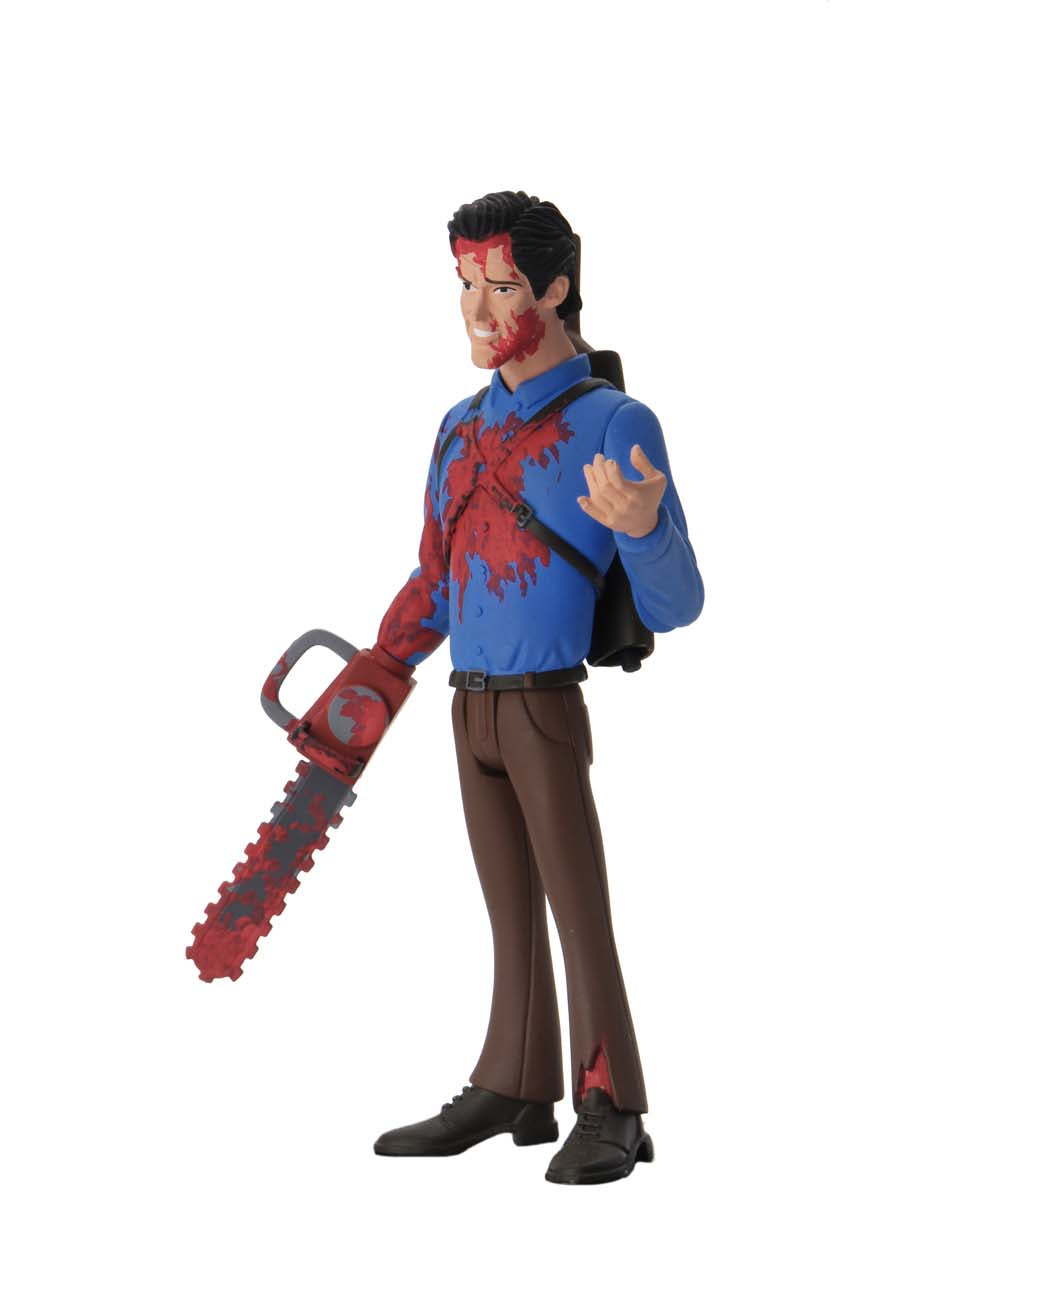 This is NECA Toony Terror Series 5 Evil Dead 2 Ash Williams and he has a bloody chainsaw, brown pants and a blue shirt, with a gun on his back.